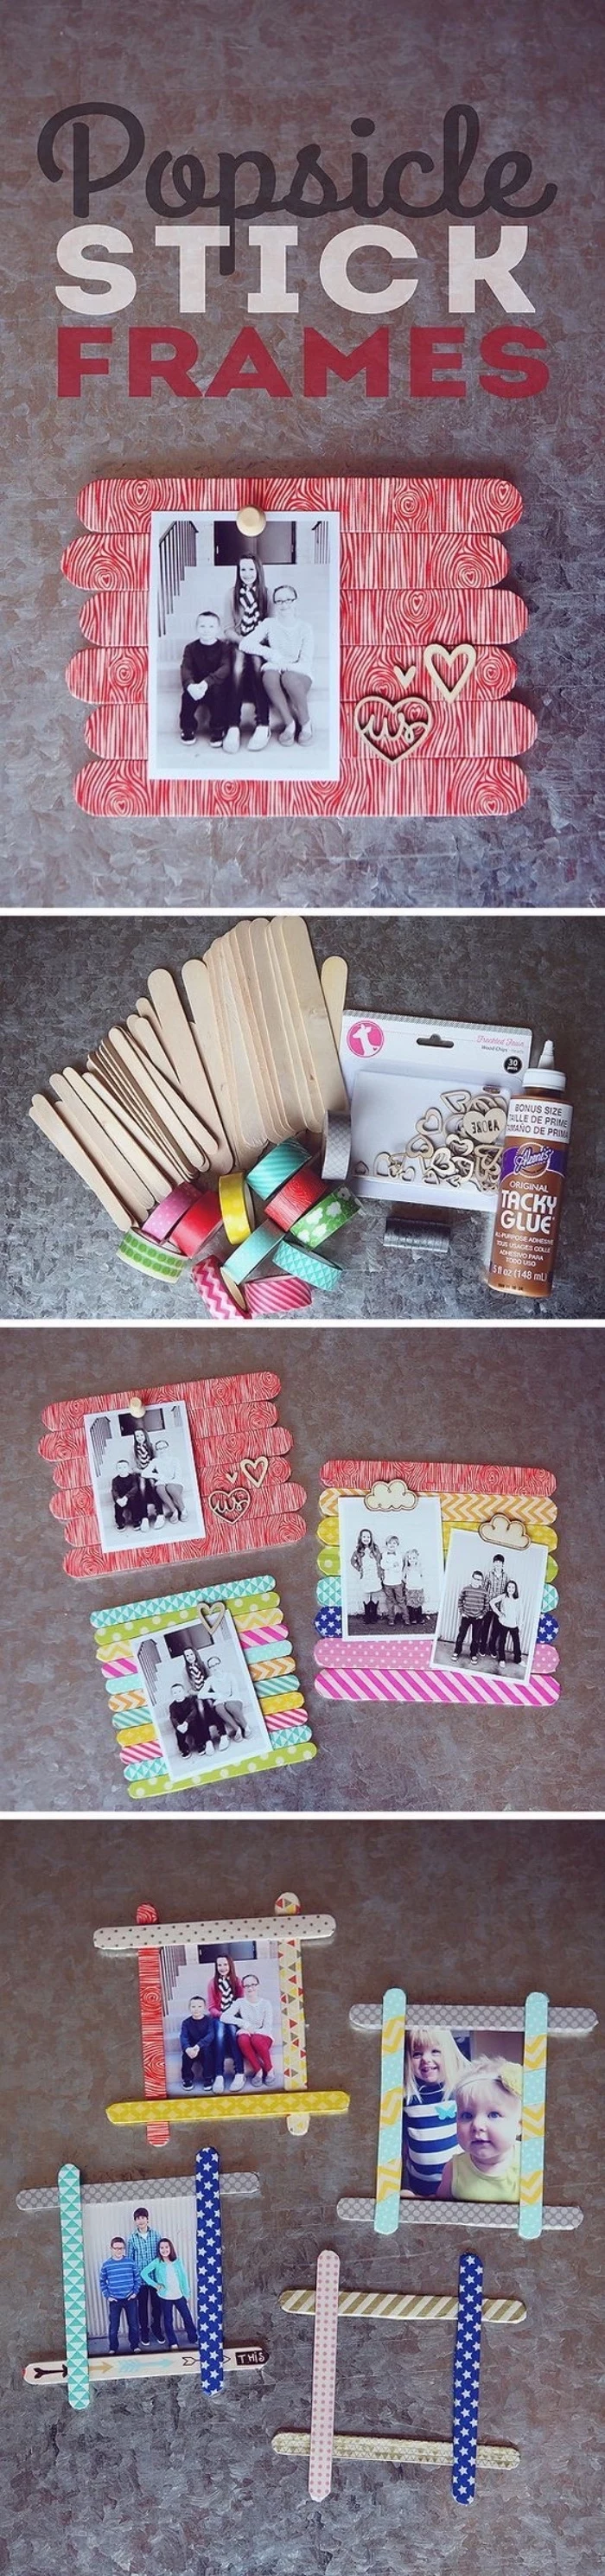 popsicle stick frames, different photos, language activities for preschoolers, colourful wooden sticks